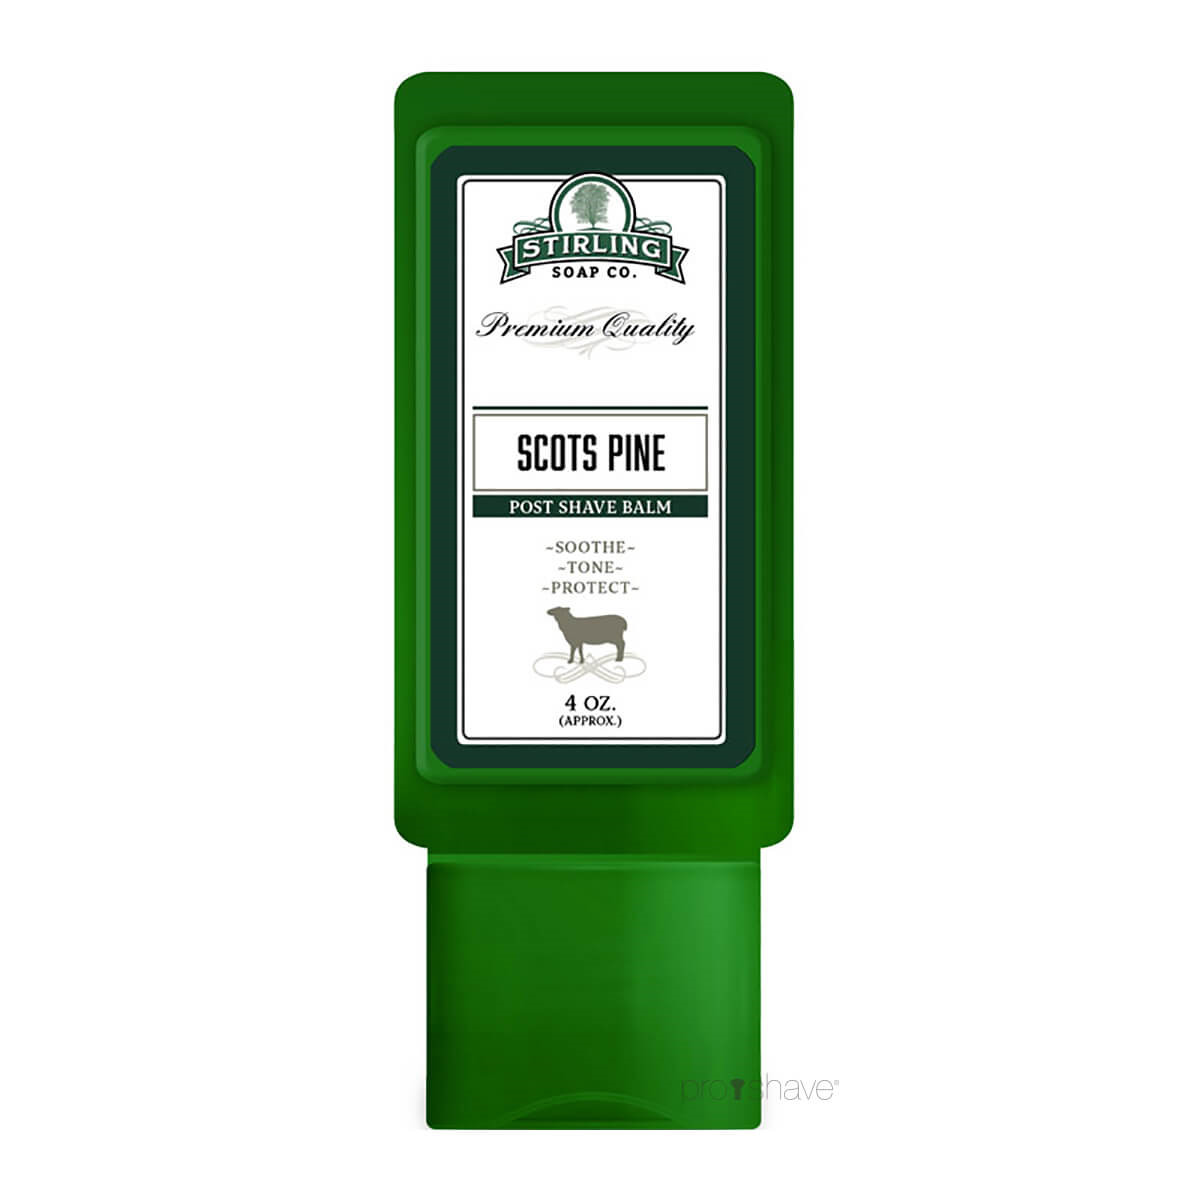 Stirling Soap Co. Aftershave Balm, Scots Pine Sheep, 118 ml.